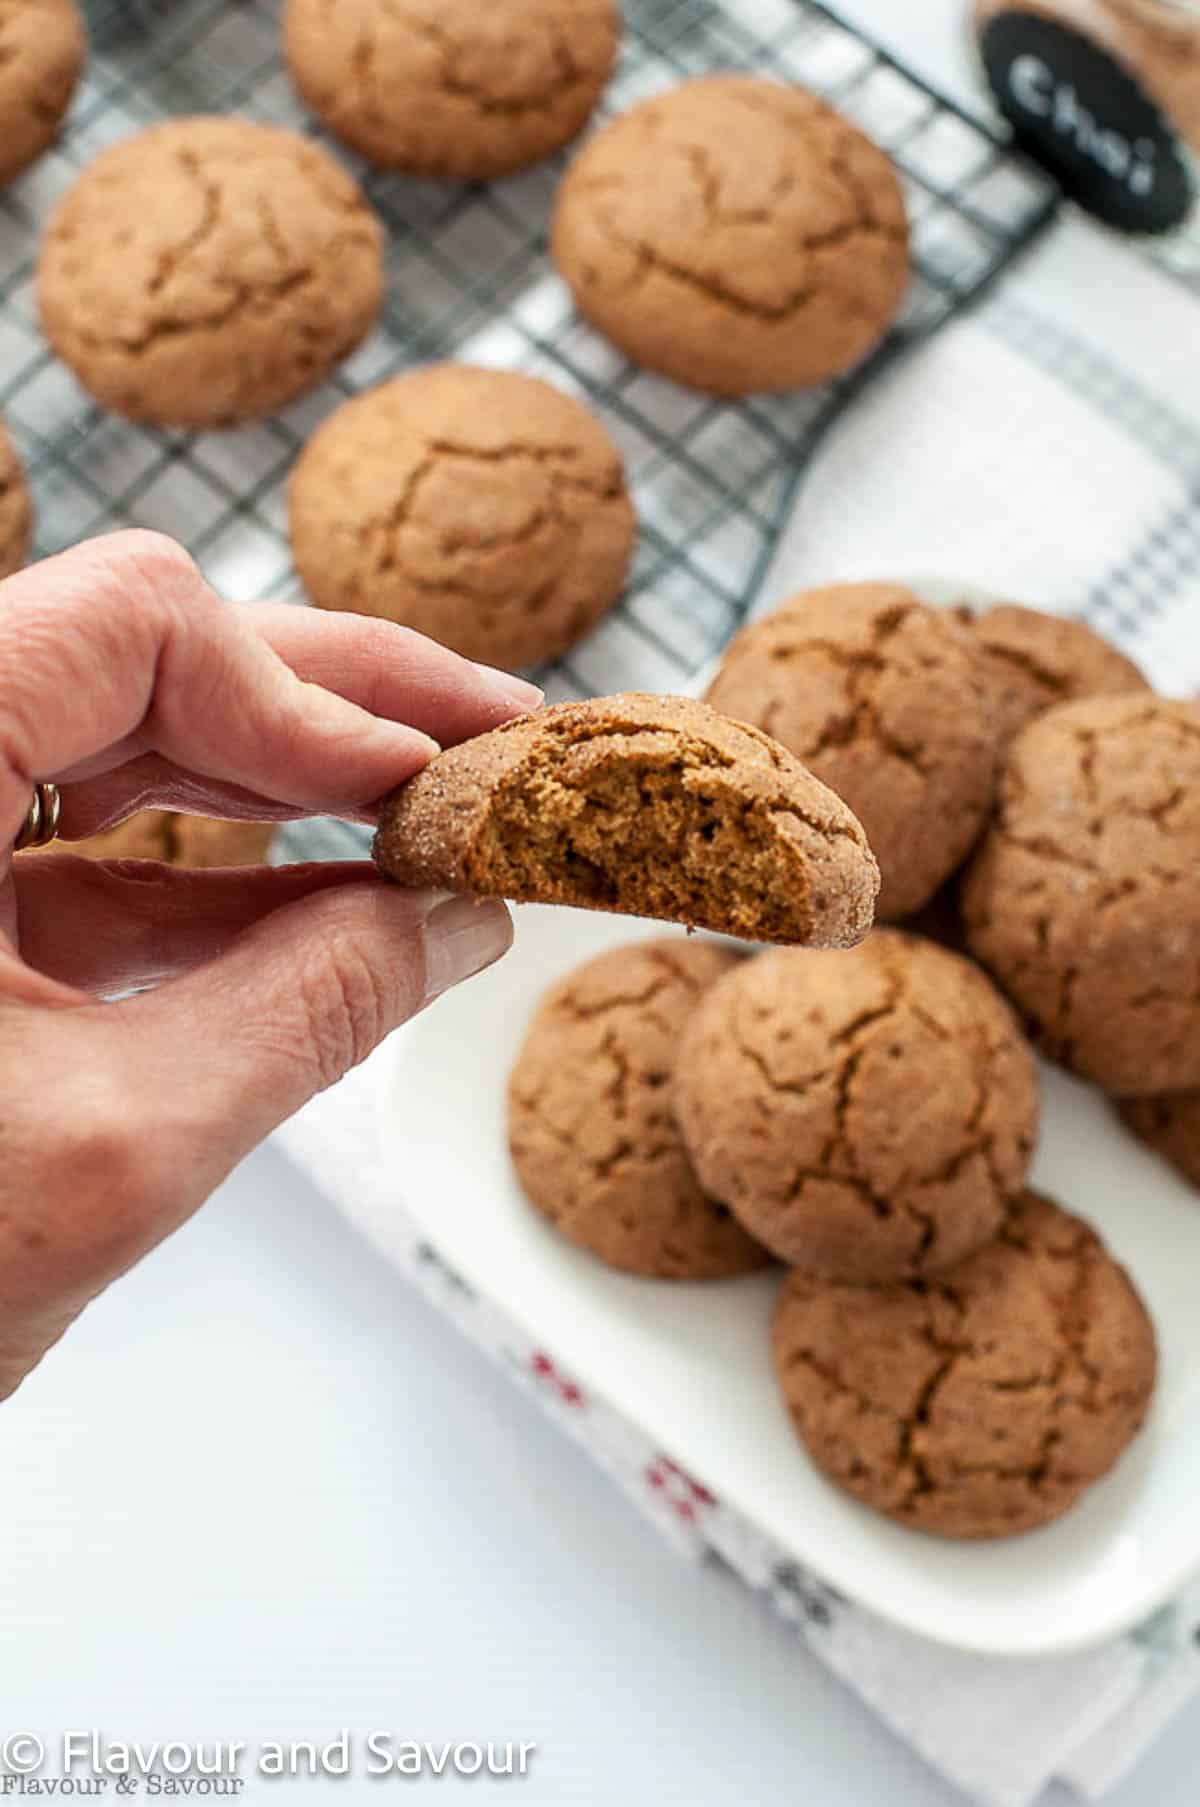 A hand holding a gluten-free snickerdoodle cookie to show the interior of the cookie.